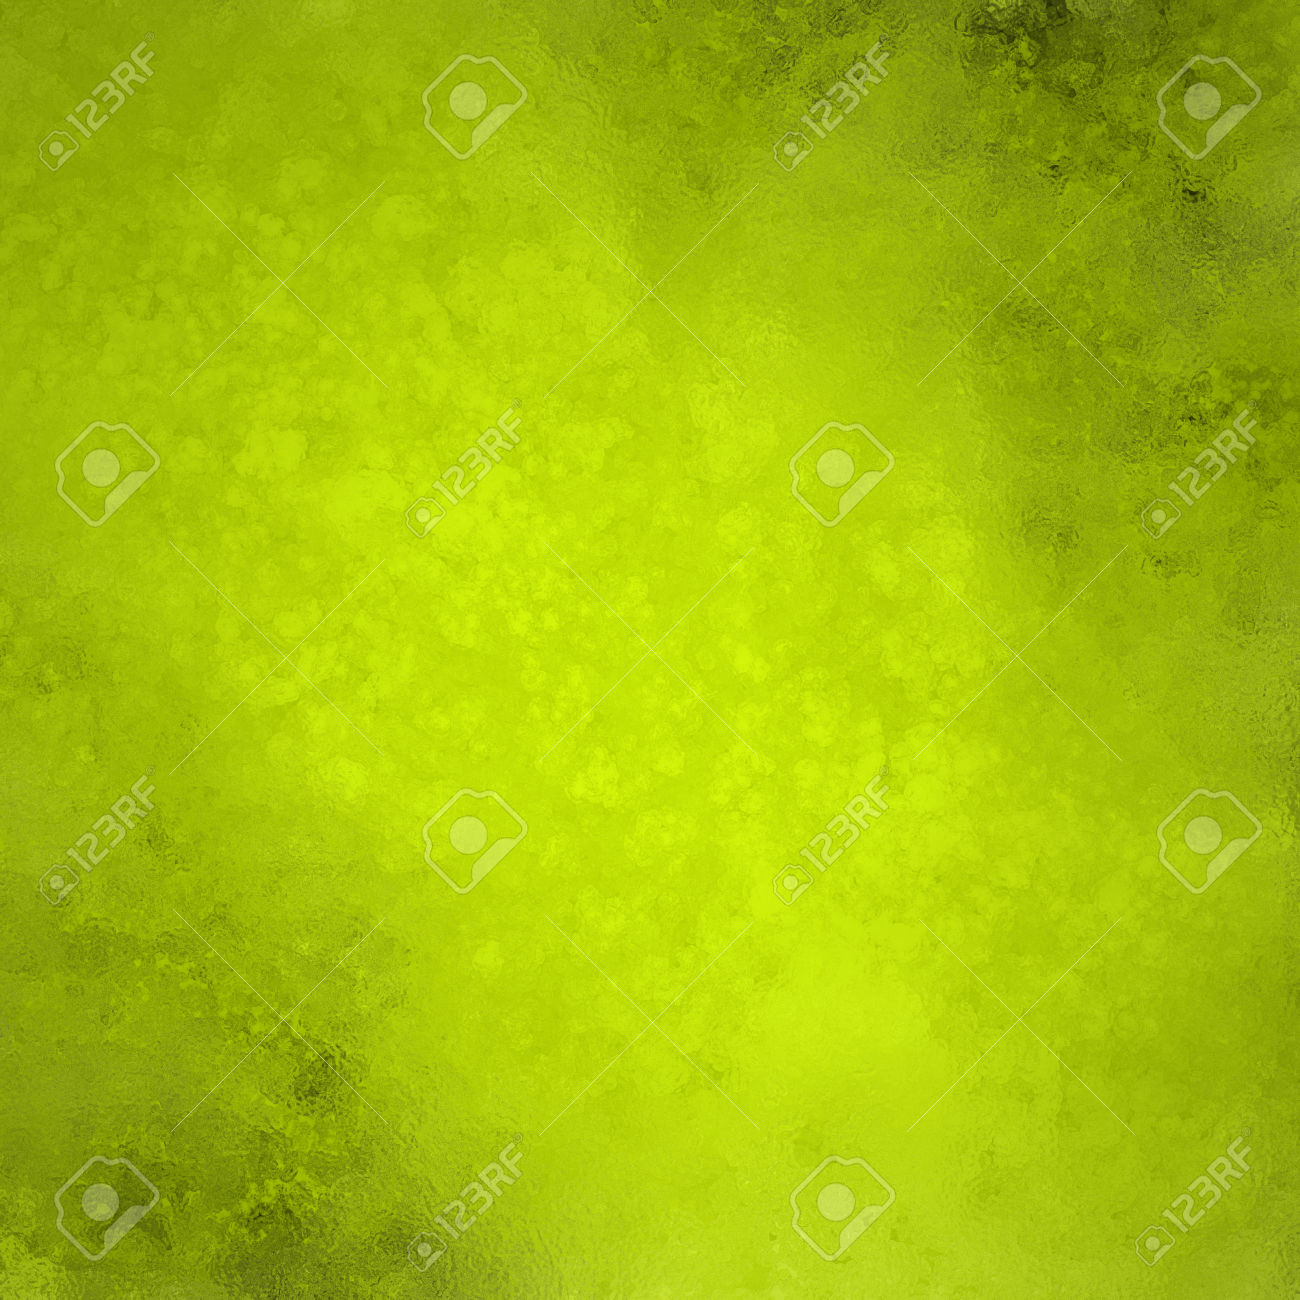 Yellow Solid Color Background The